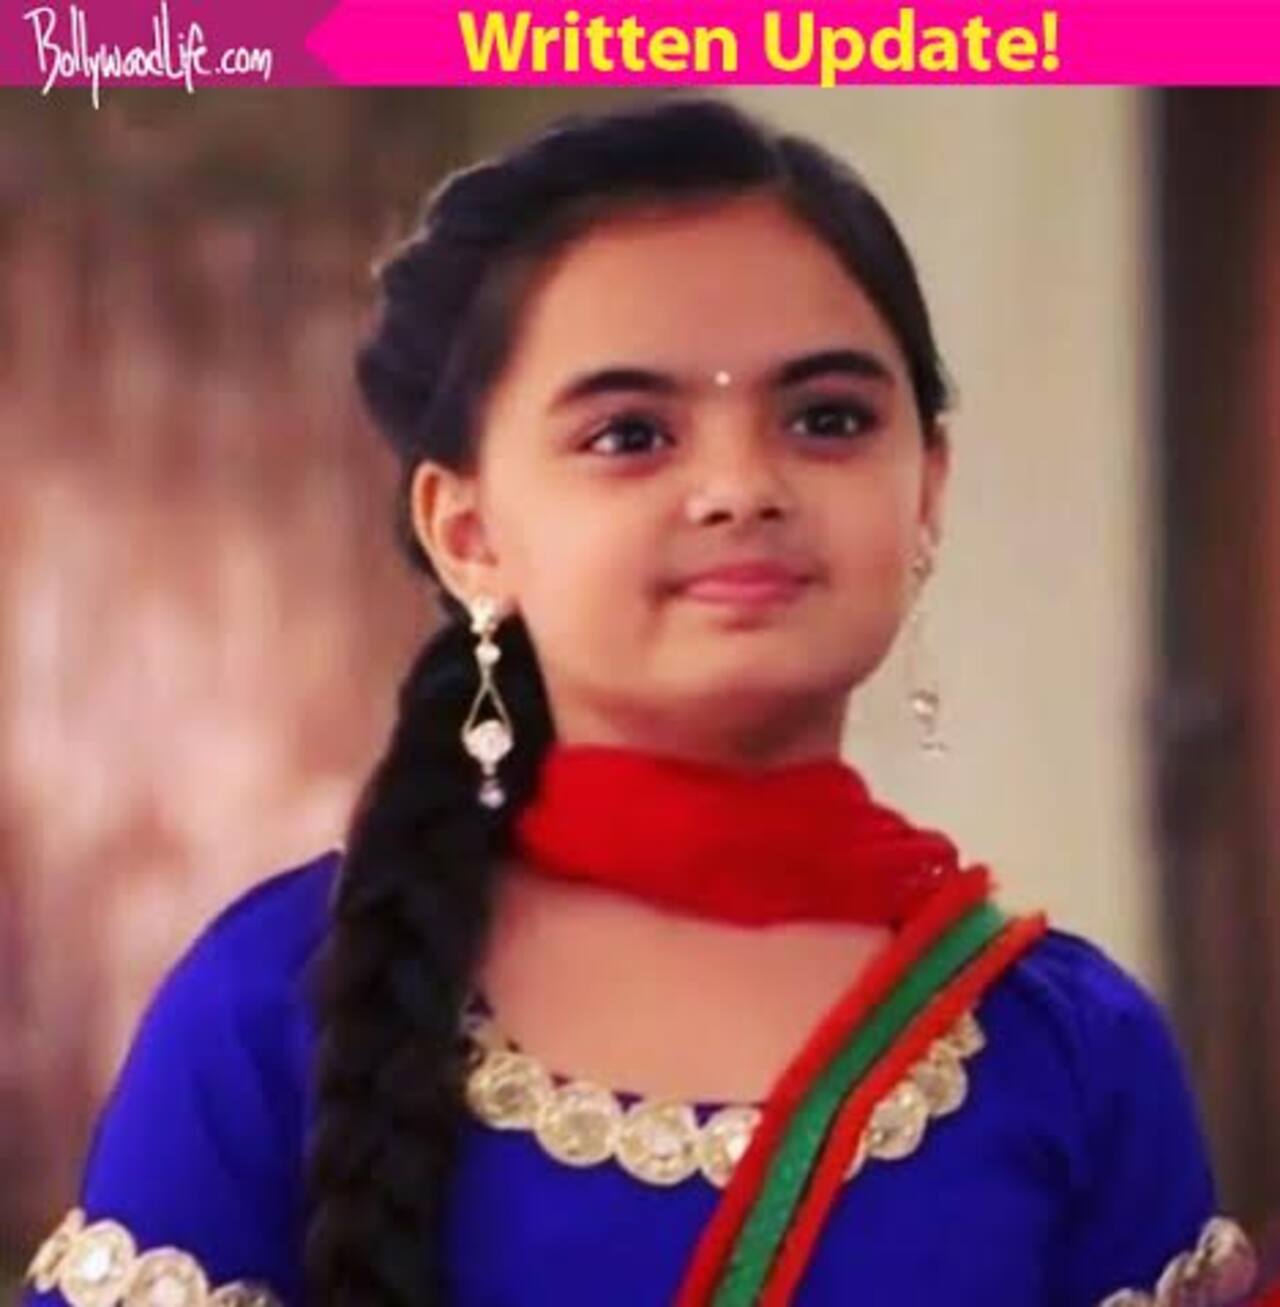 Yeh Hain Mohabbatein full episode 25th July written update: Shagun gets angry at Ruhi's idea of telling the truth to Pihu!